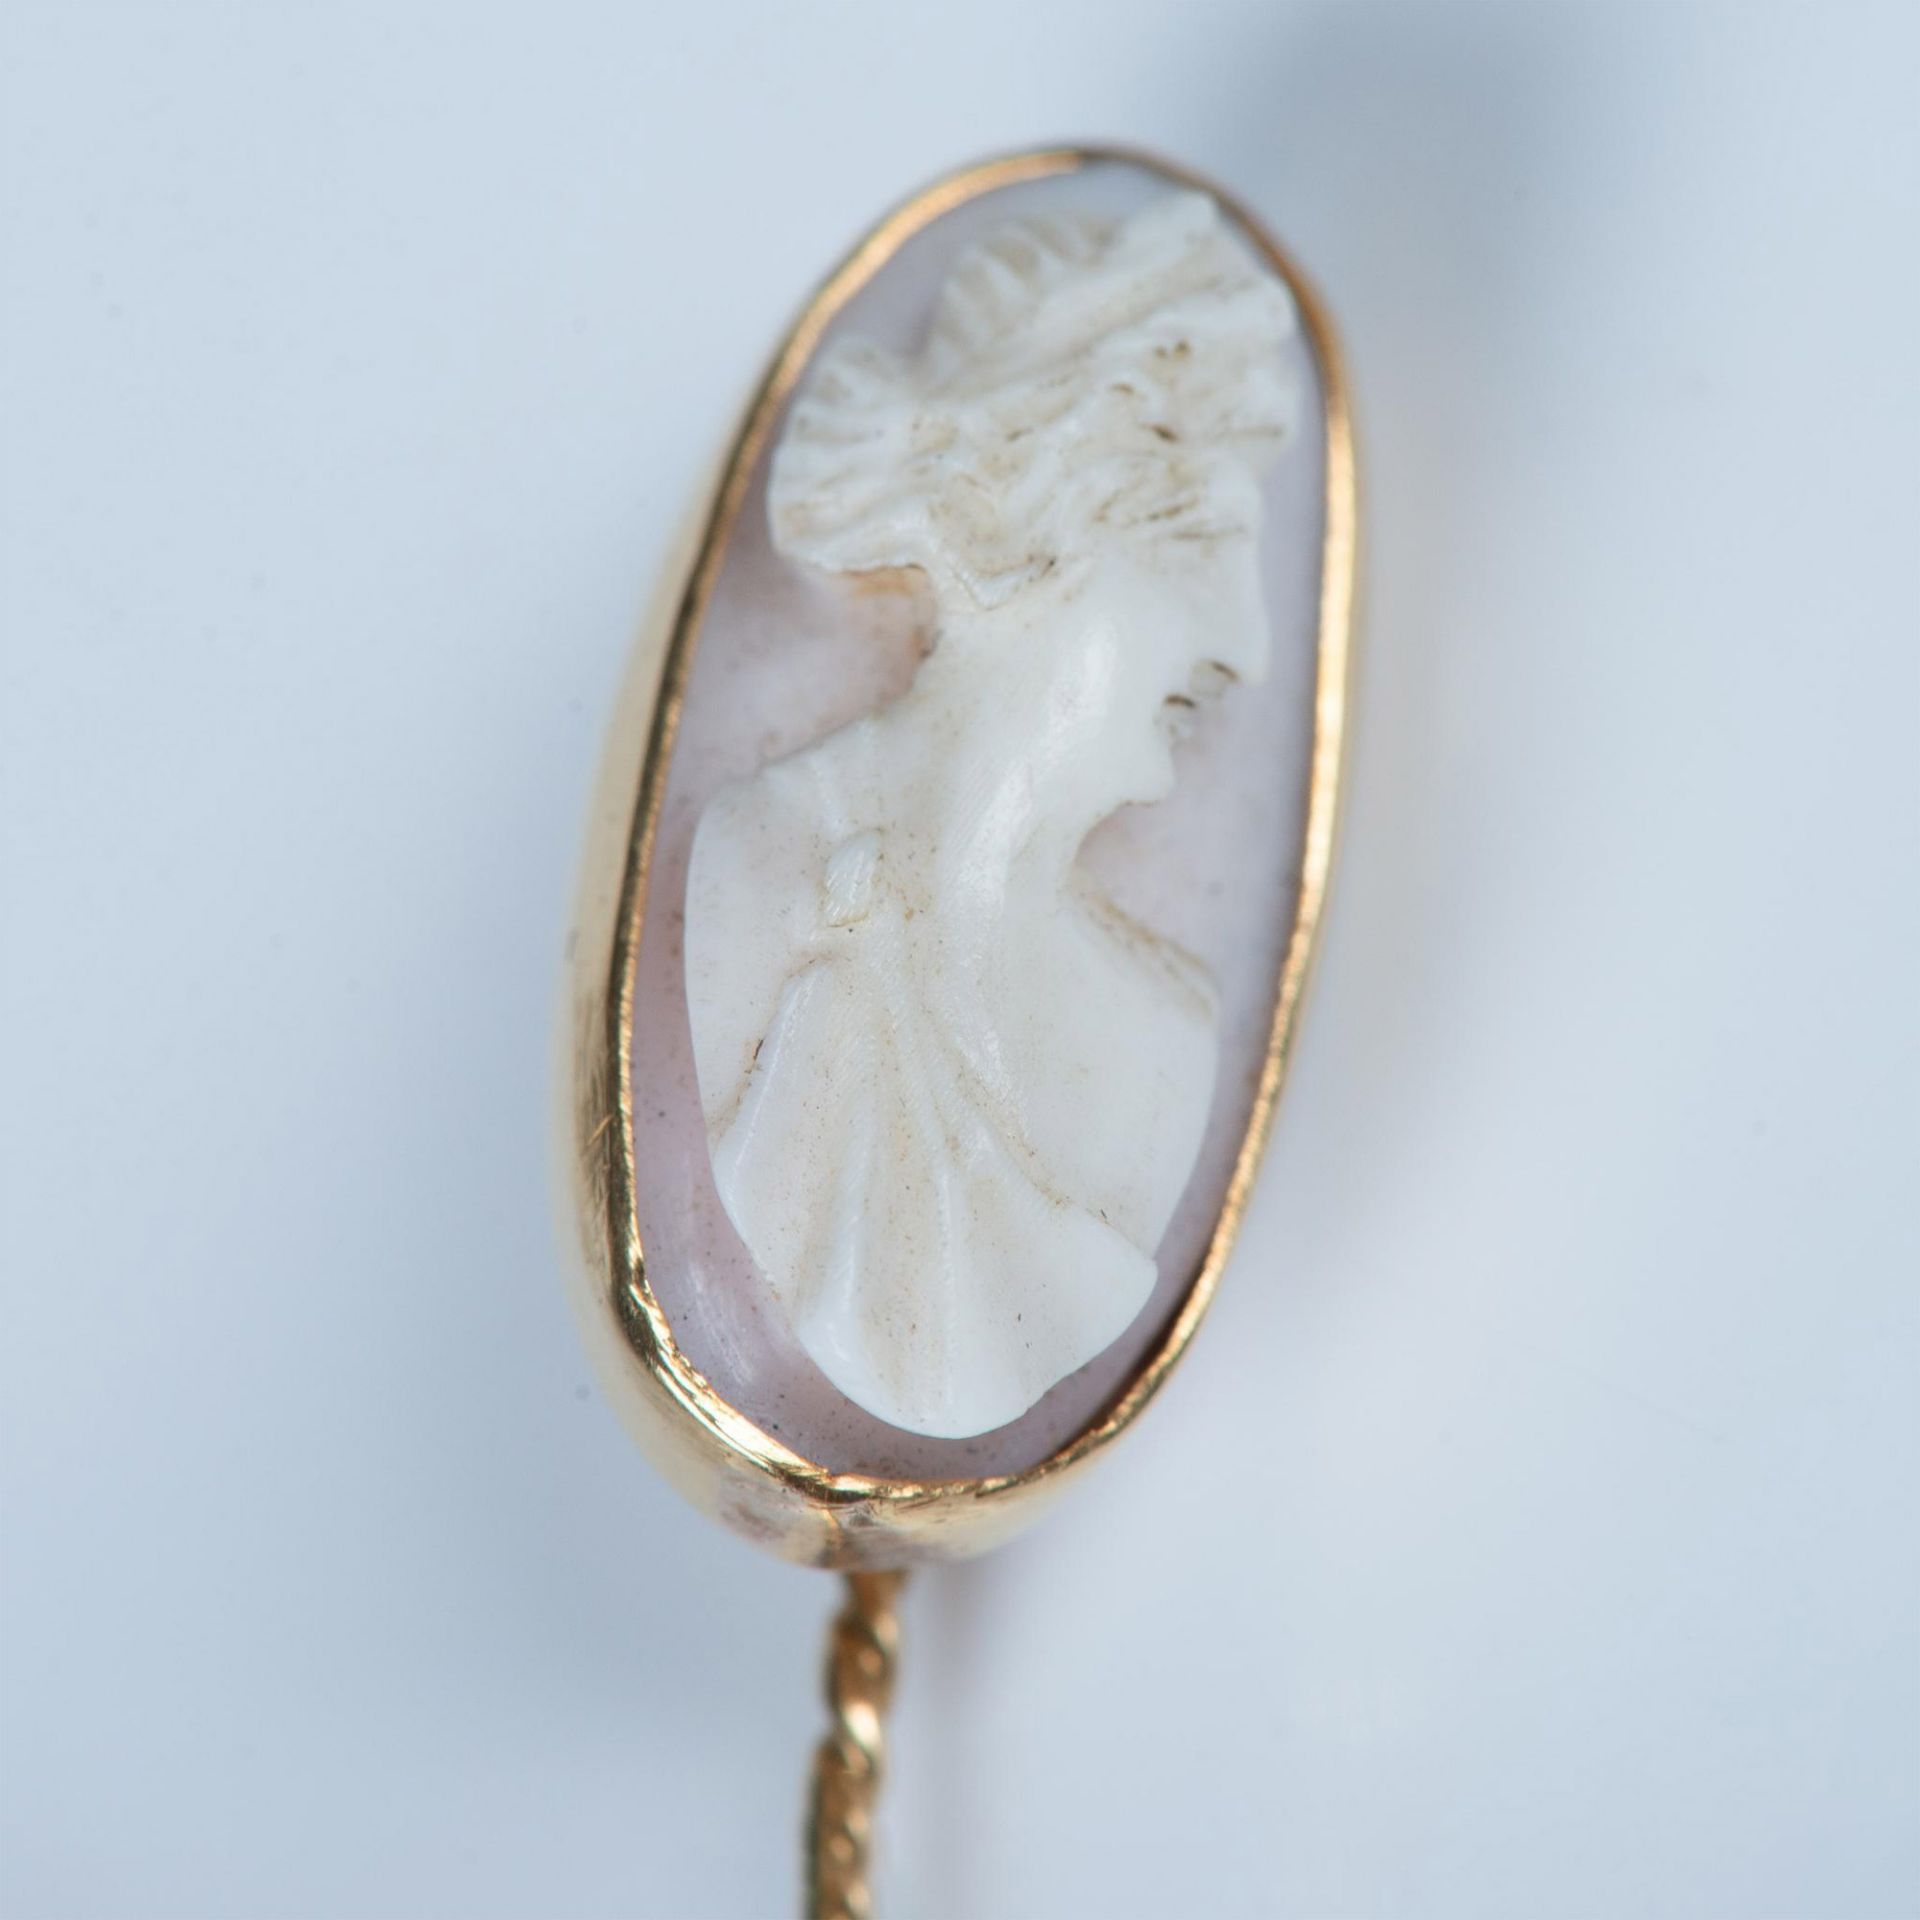 2pc Vintage 14K White Gold Cameo Brooch & Gold Stick Pin - Image 3 of 5